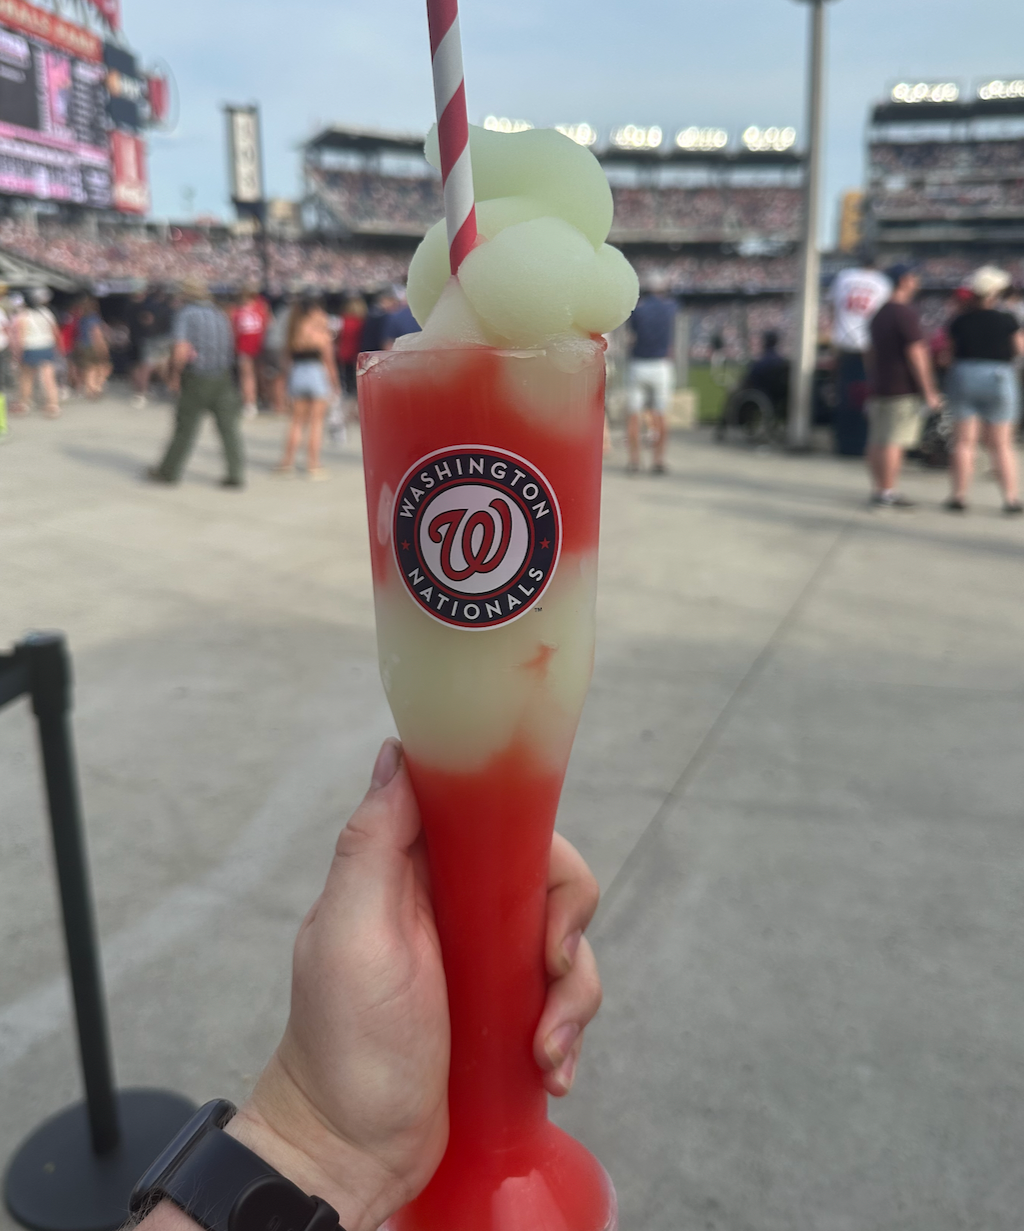 Special Edition- Nationals Park: Home of the Washington Nationals